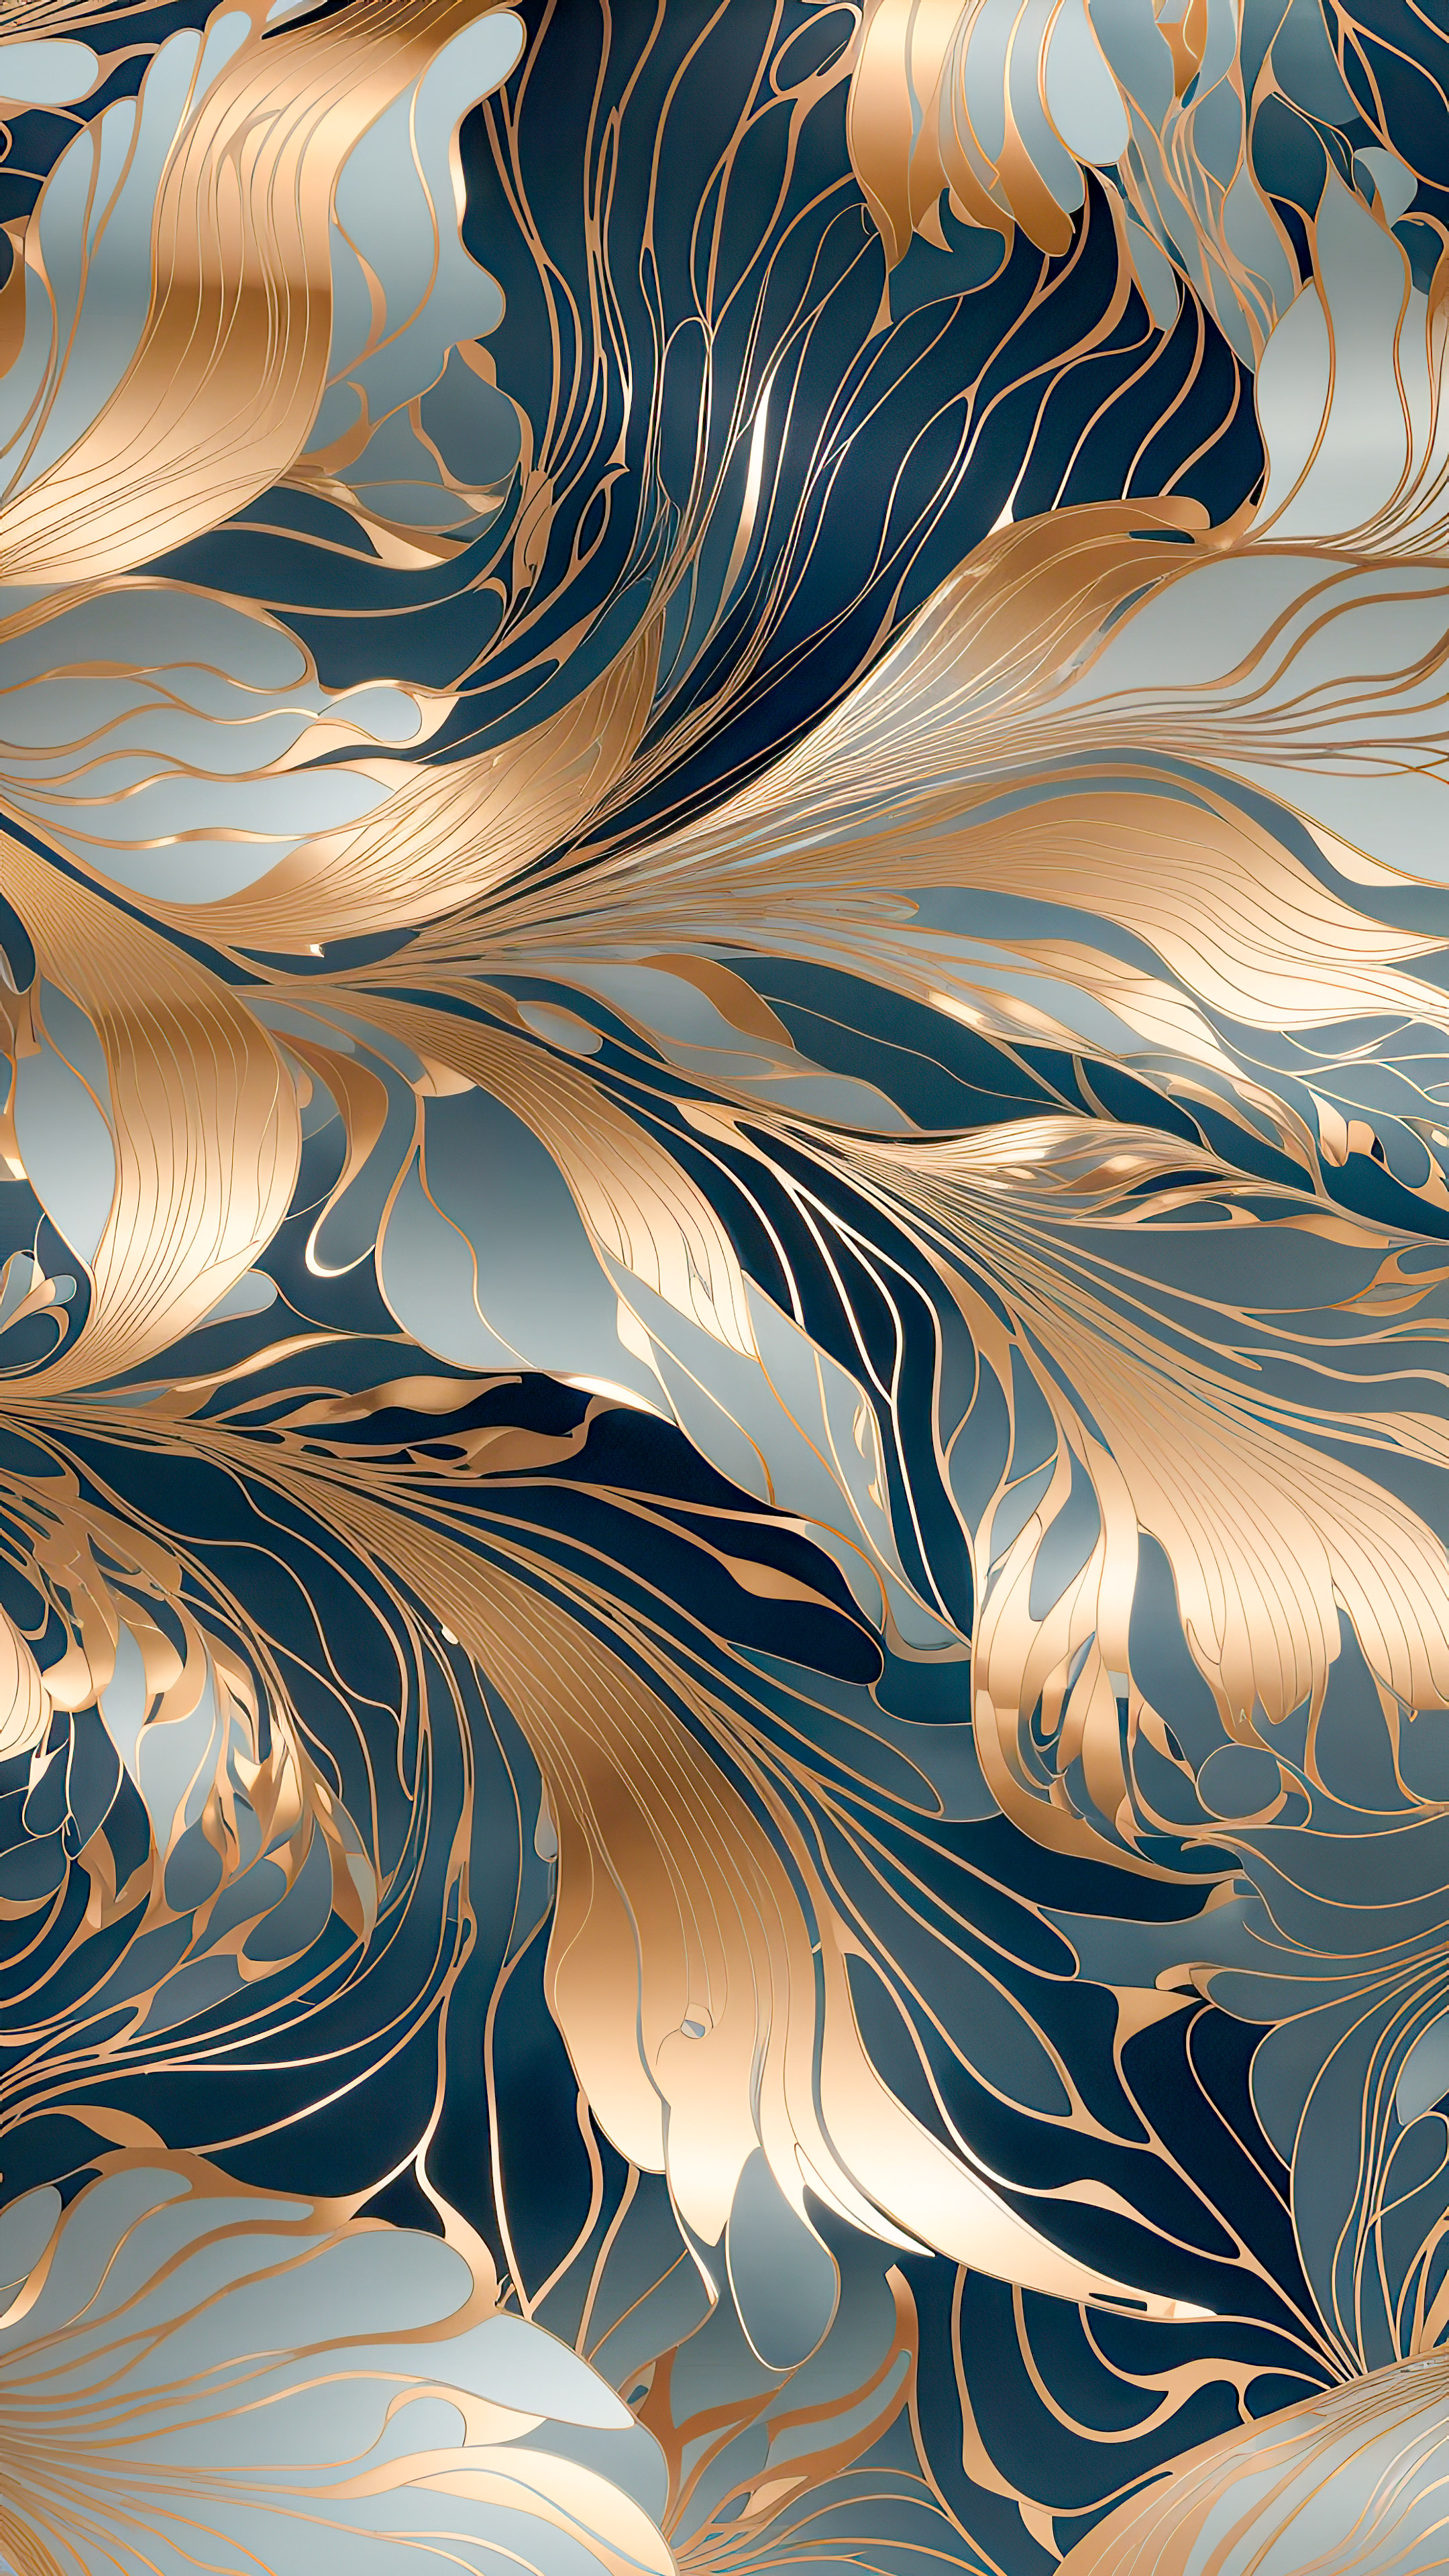 Experience the fusion of organic patterns and metallic textures in our 4K abstract iPhone wallpaper.